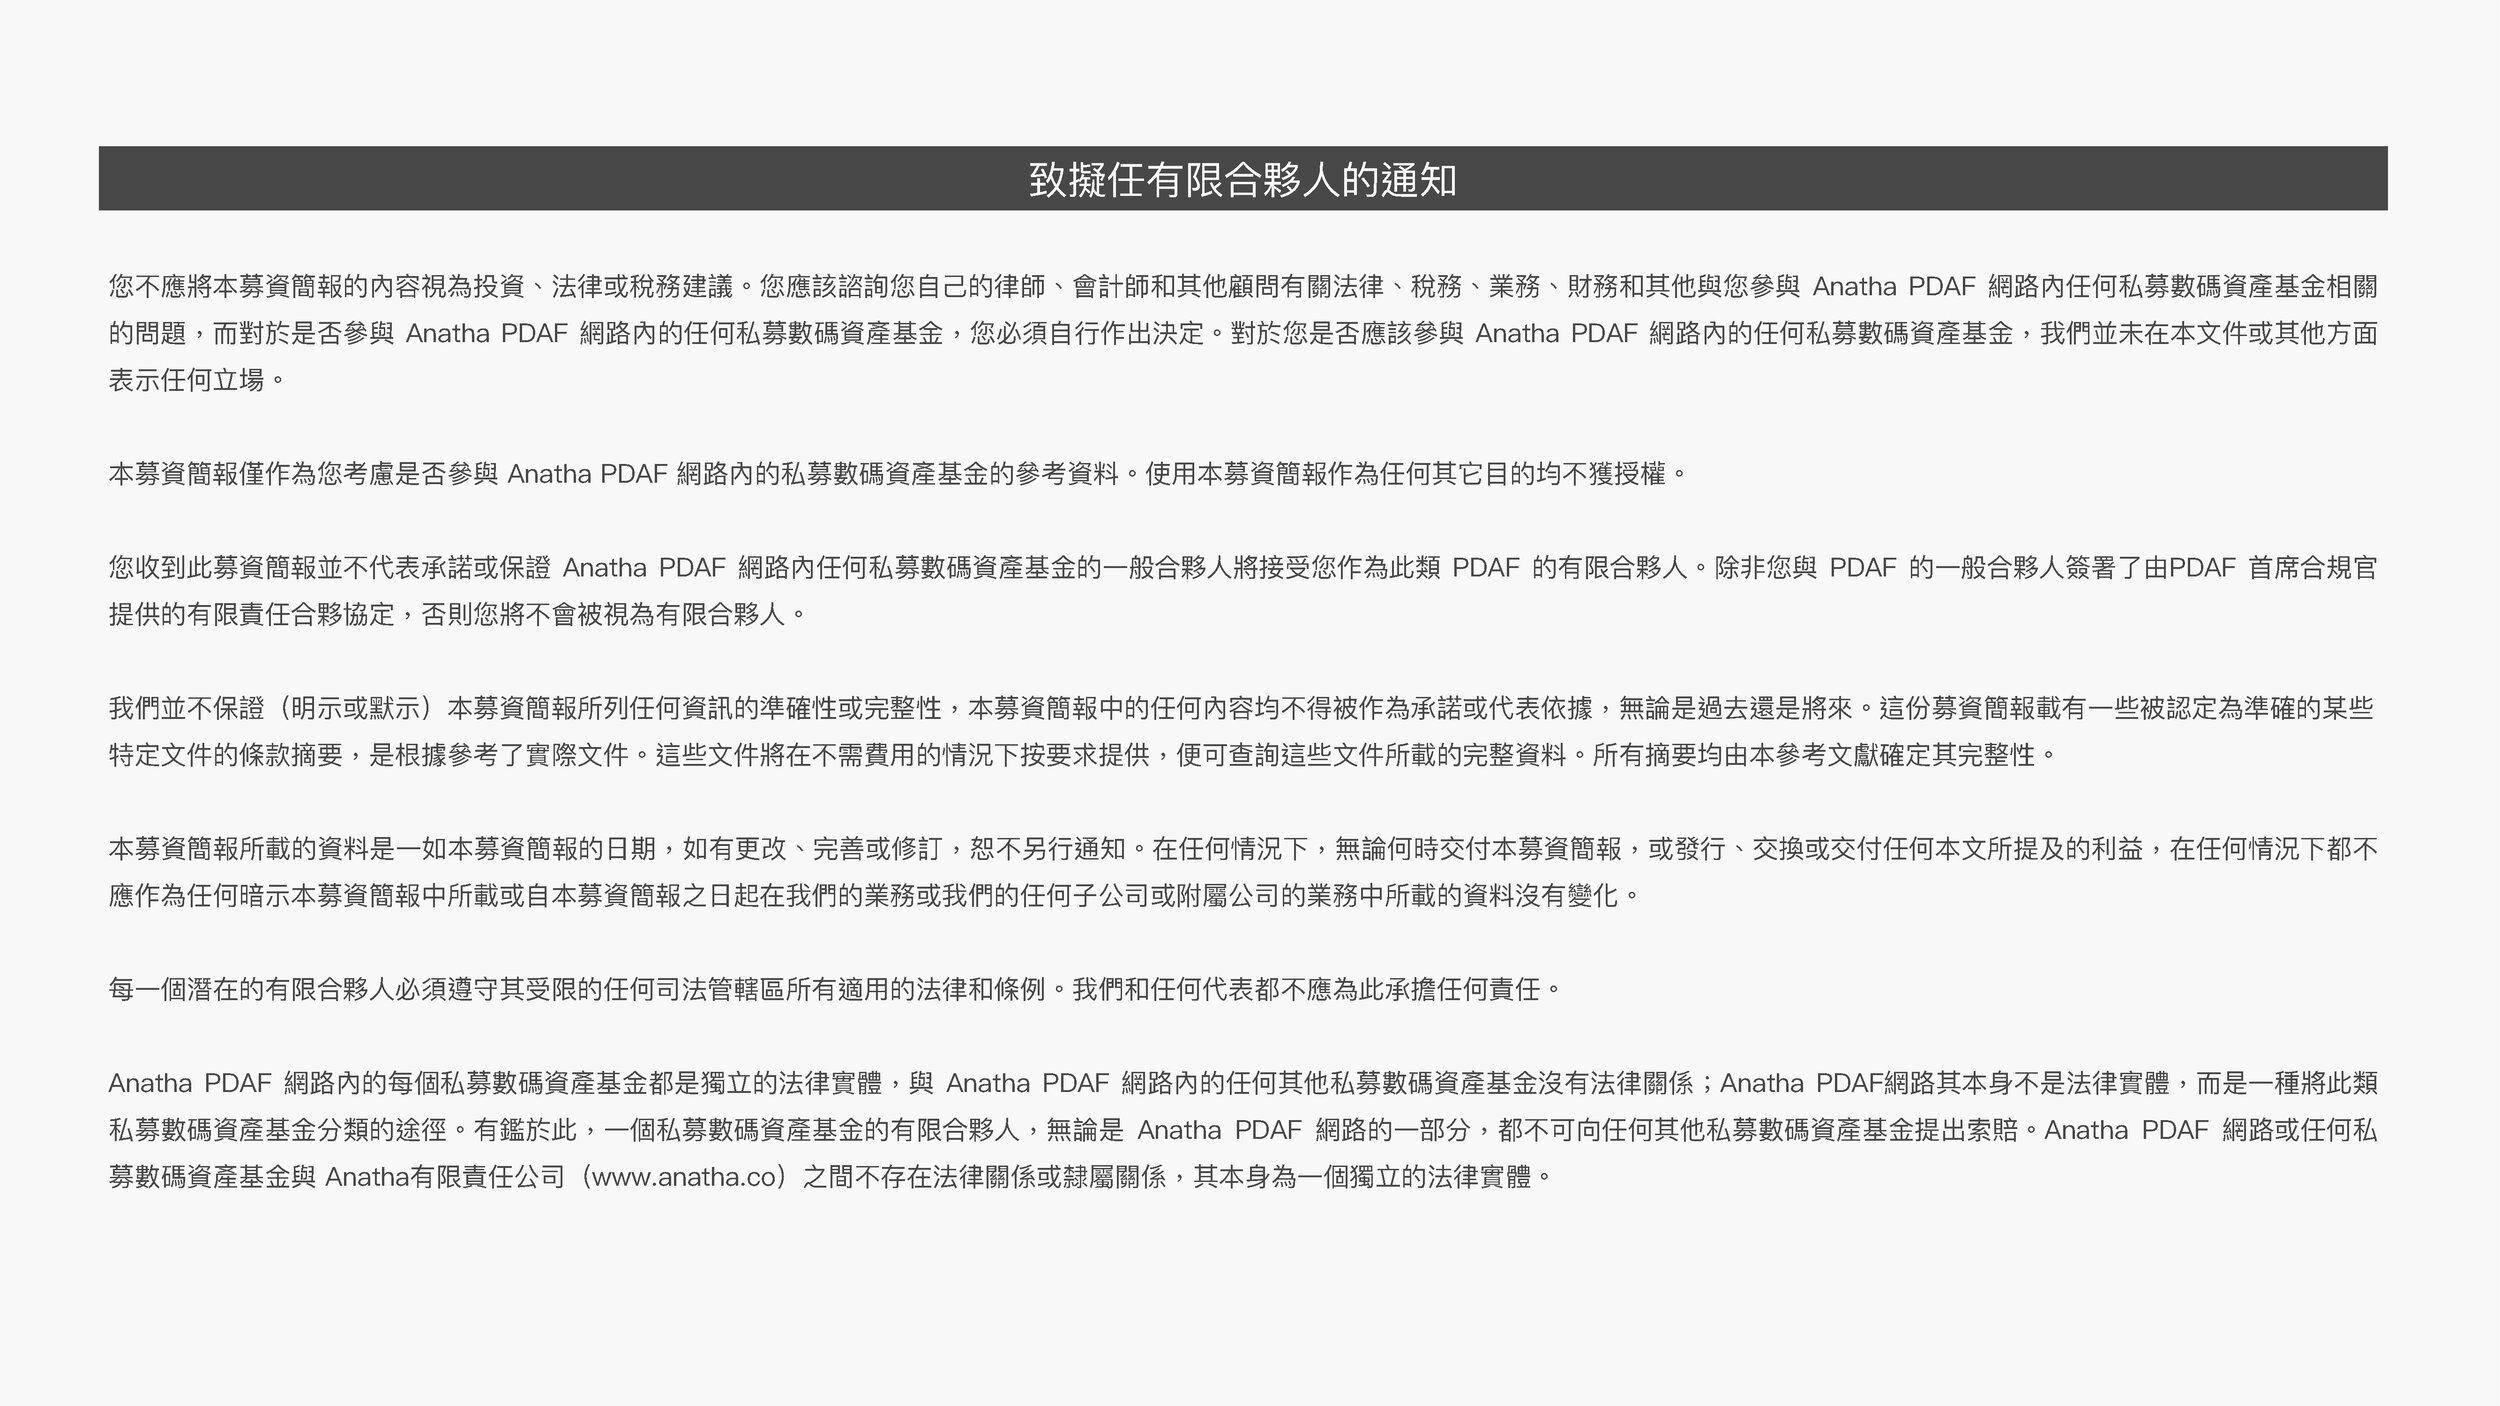 Anatha Pitch Deck - Traditional Chinese_Page_02.jpg